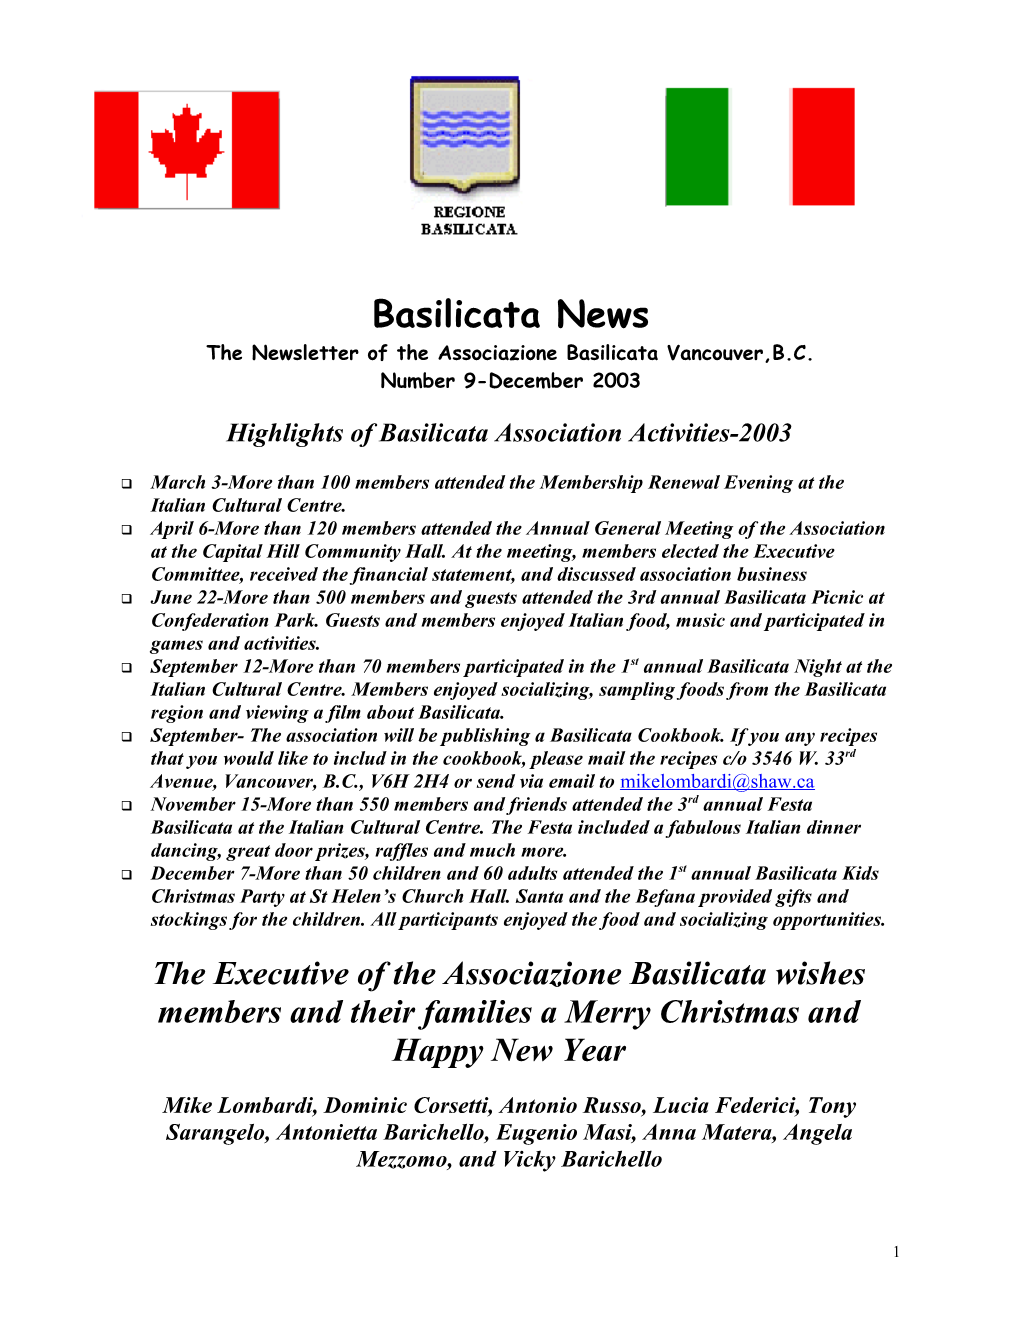 The Newsletter of the Associazione Basilicata Vancouver,B.C